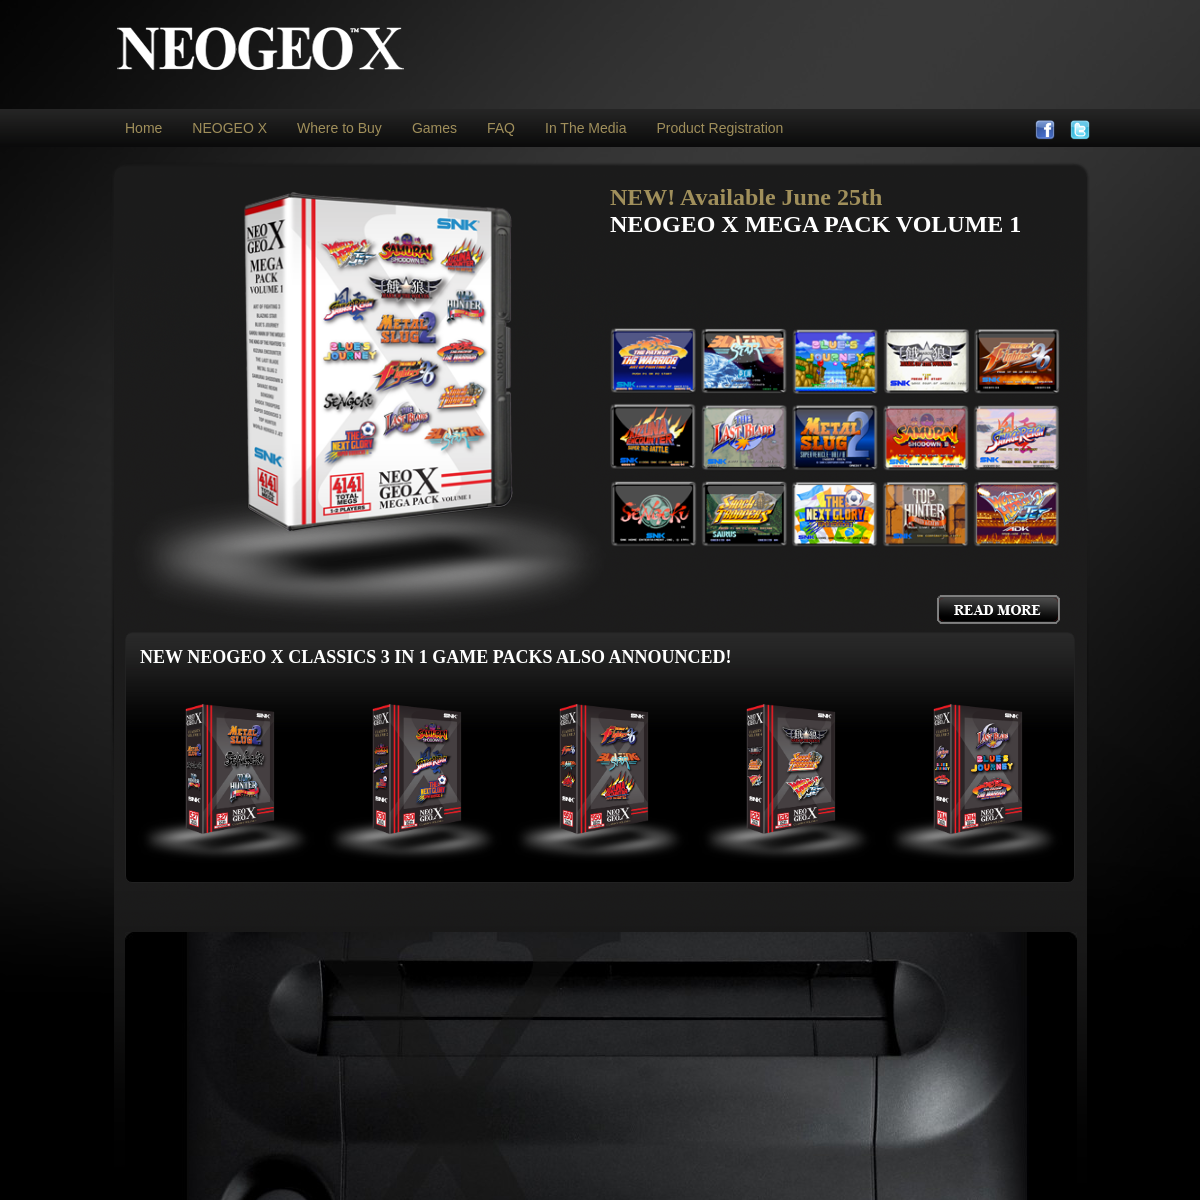 A complete backup of neogeox.com